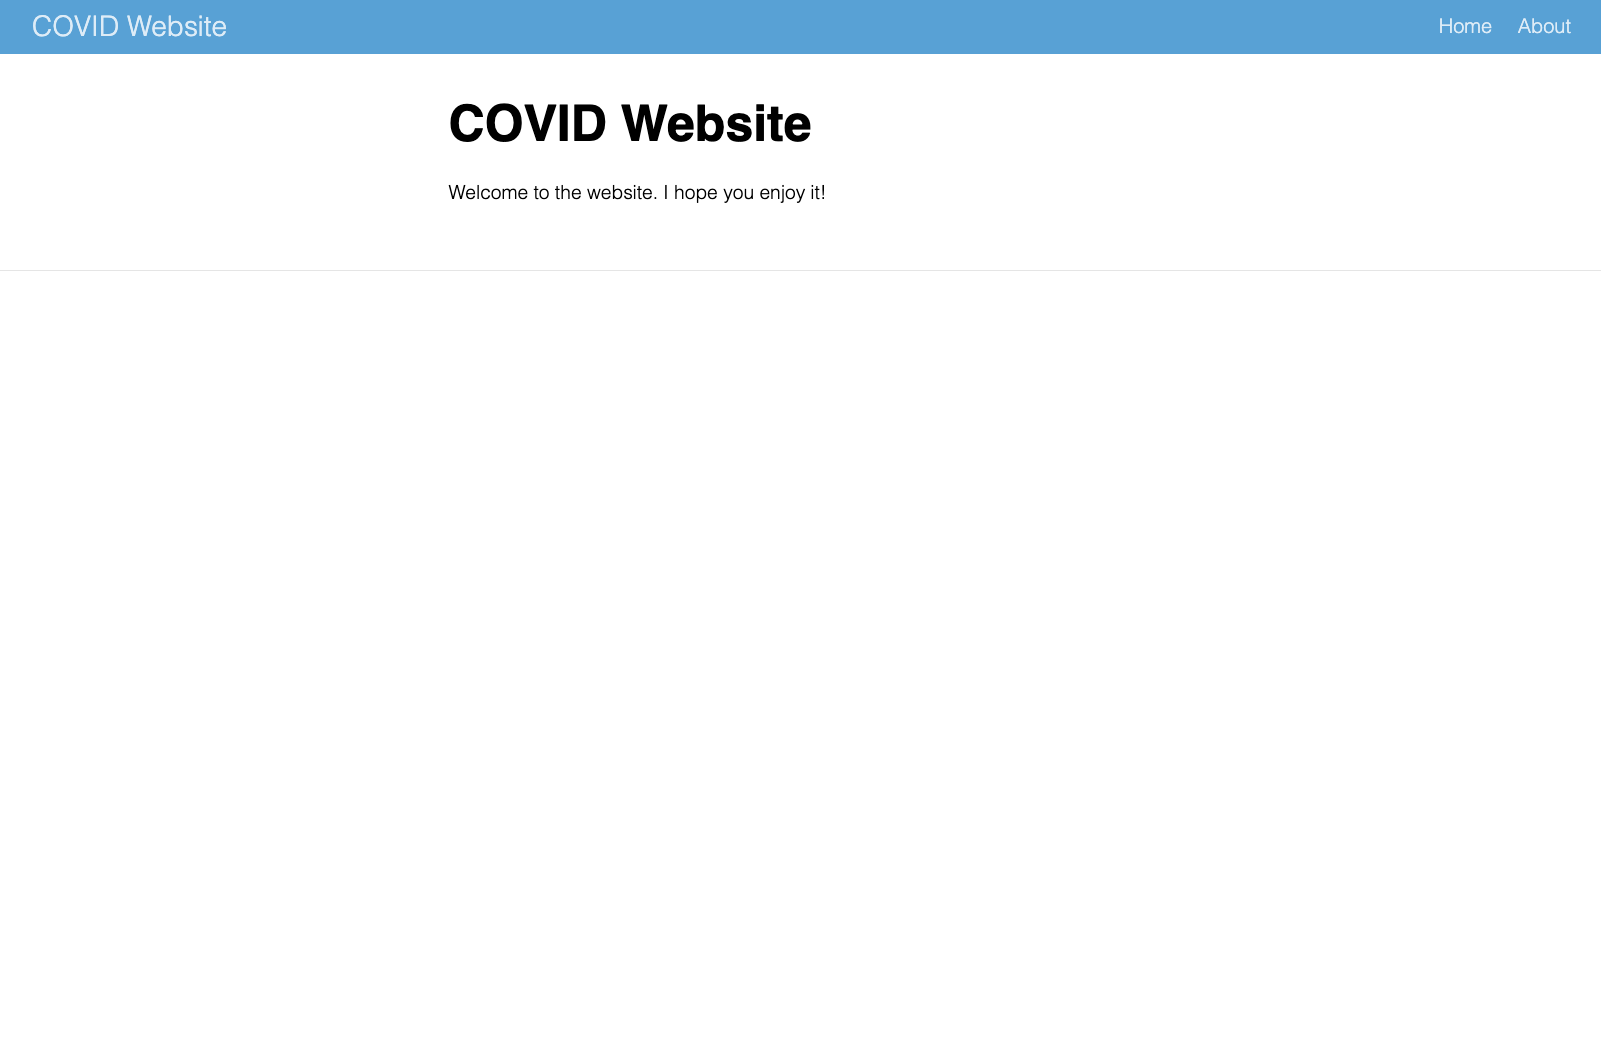 The COVID website with tweaks to the CSS